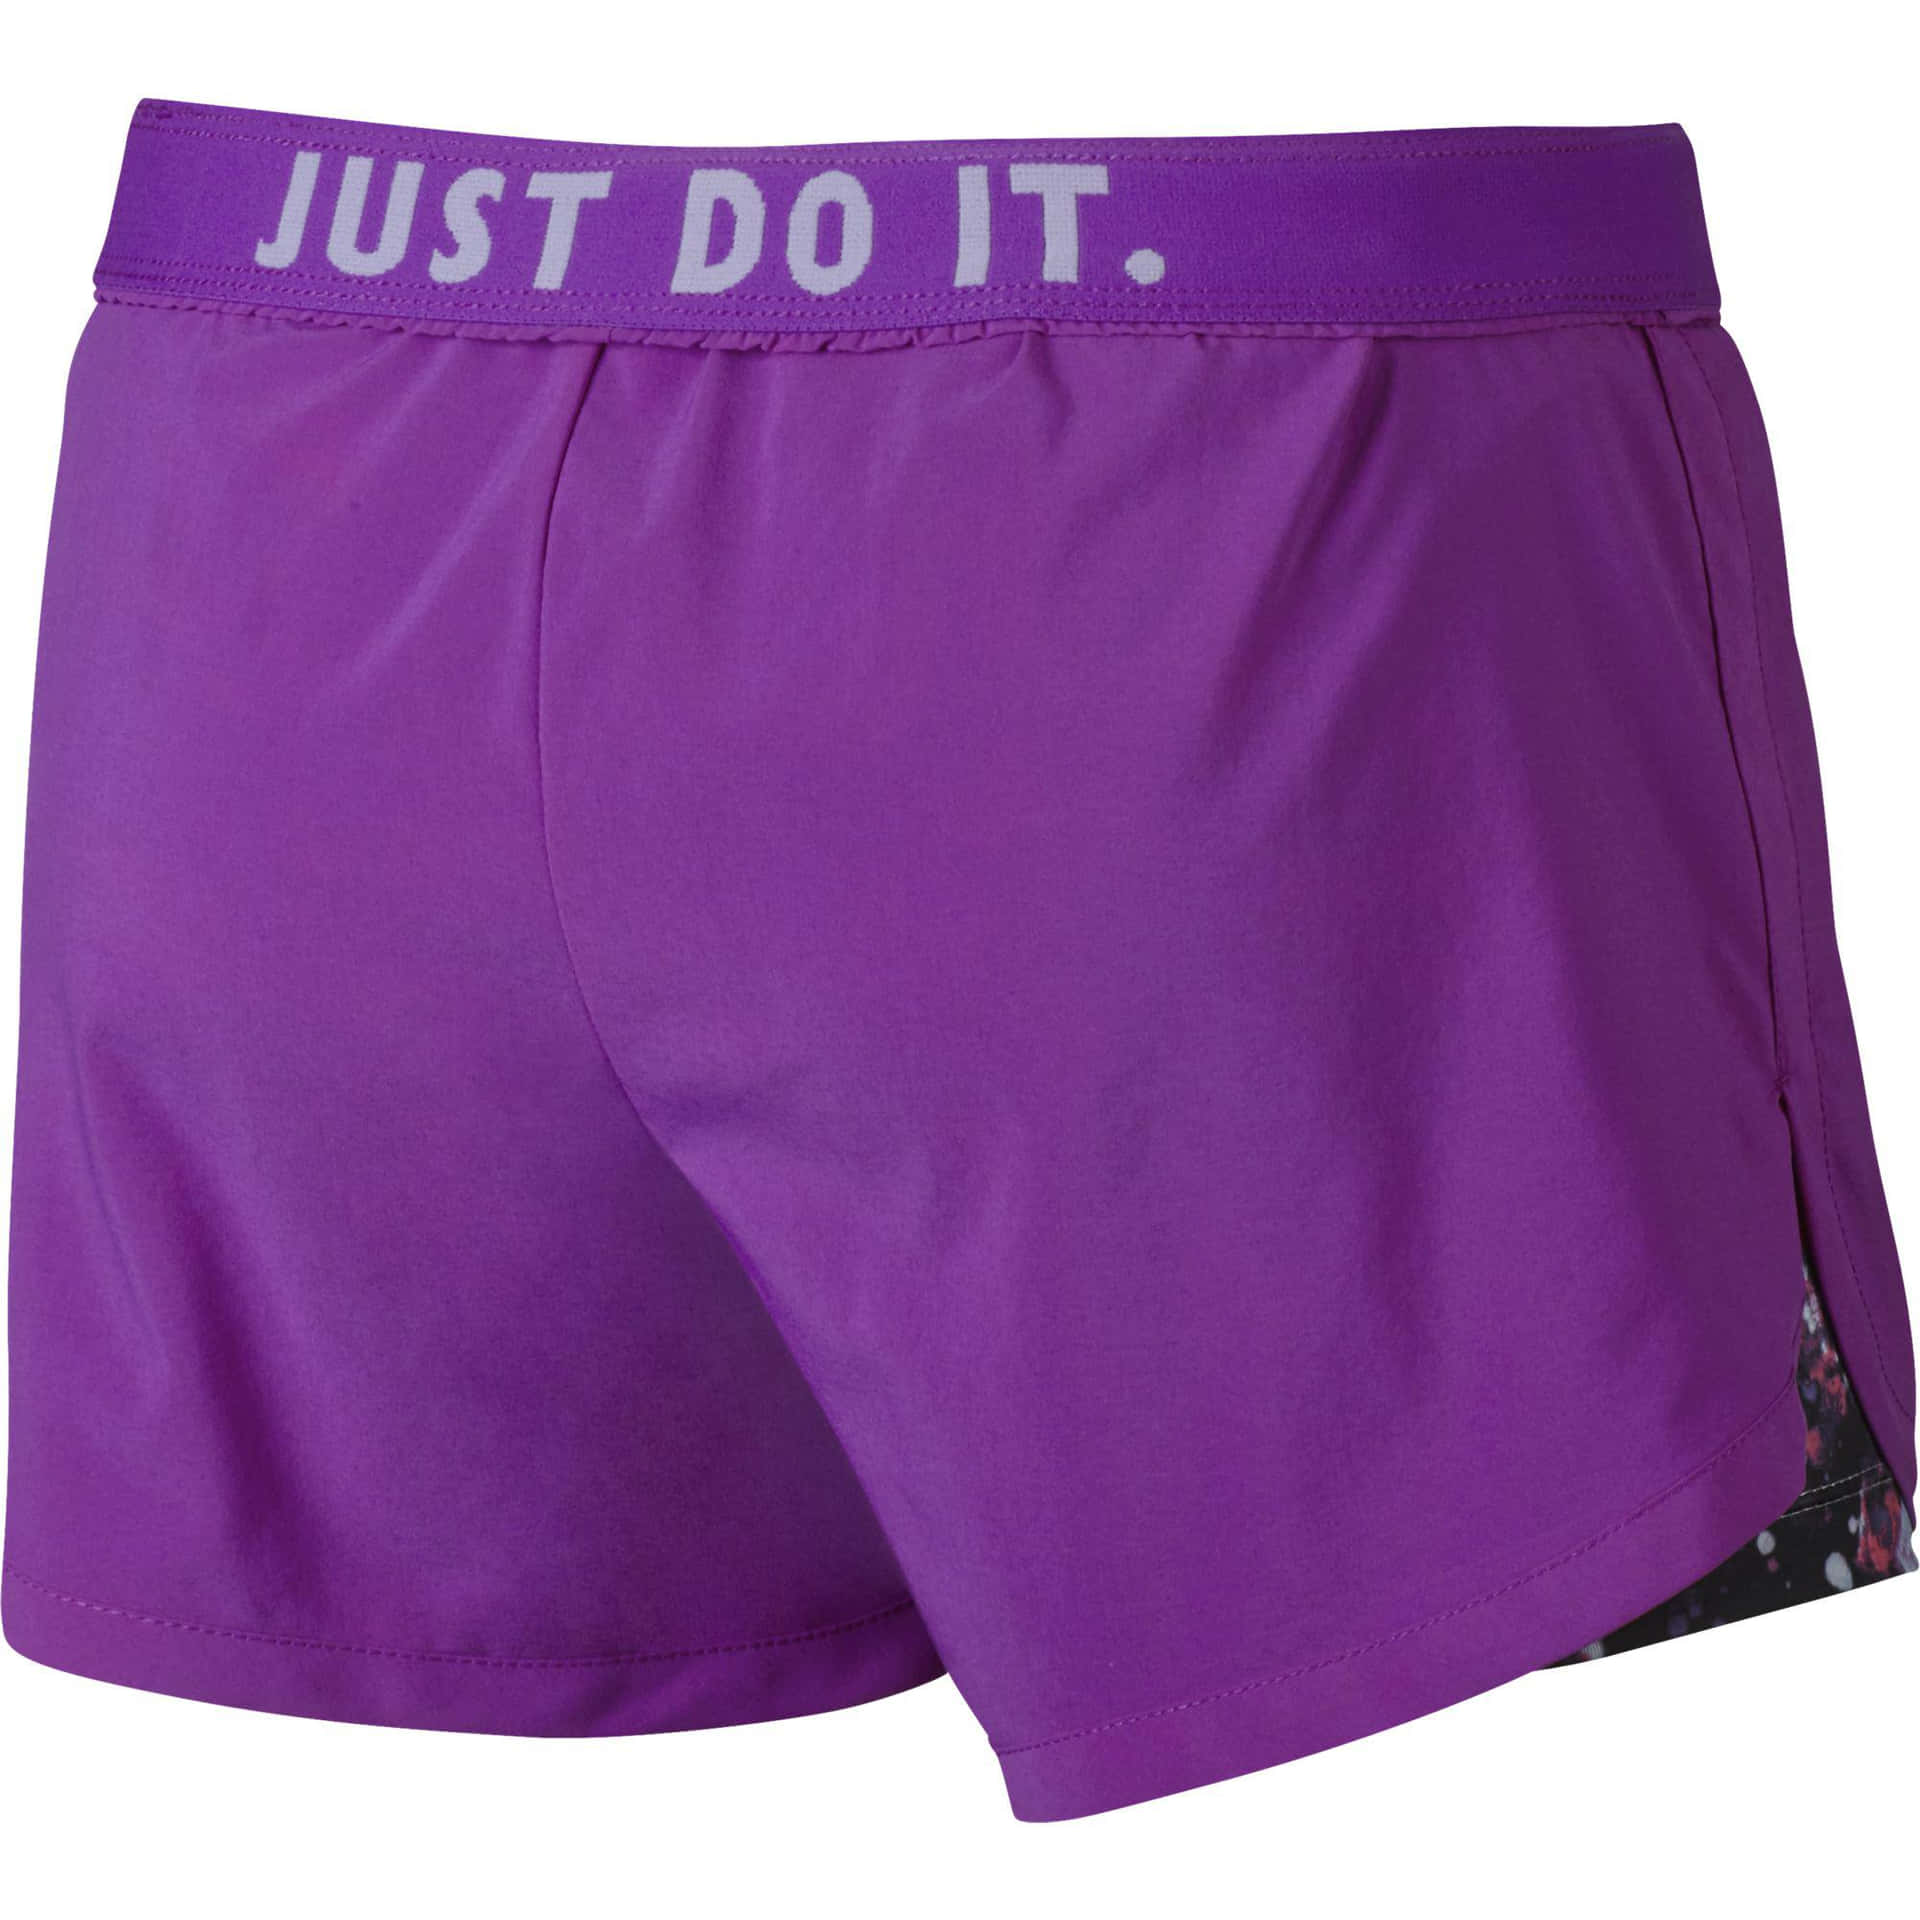 Dive into summer in style with these vibrant purple shorts. Wallpaper